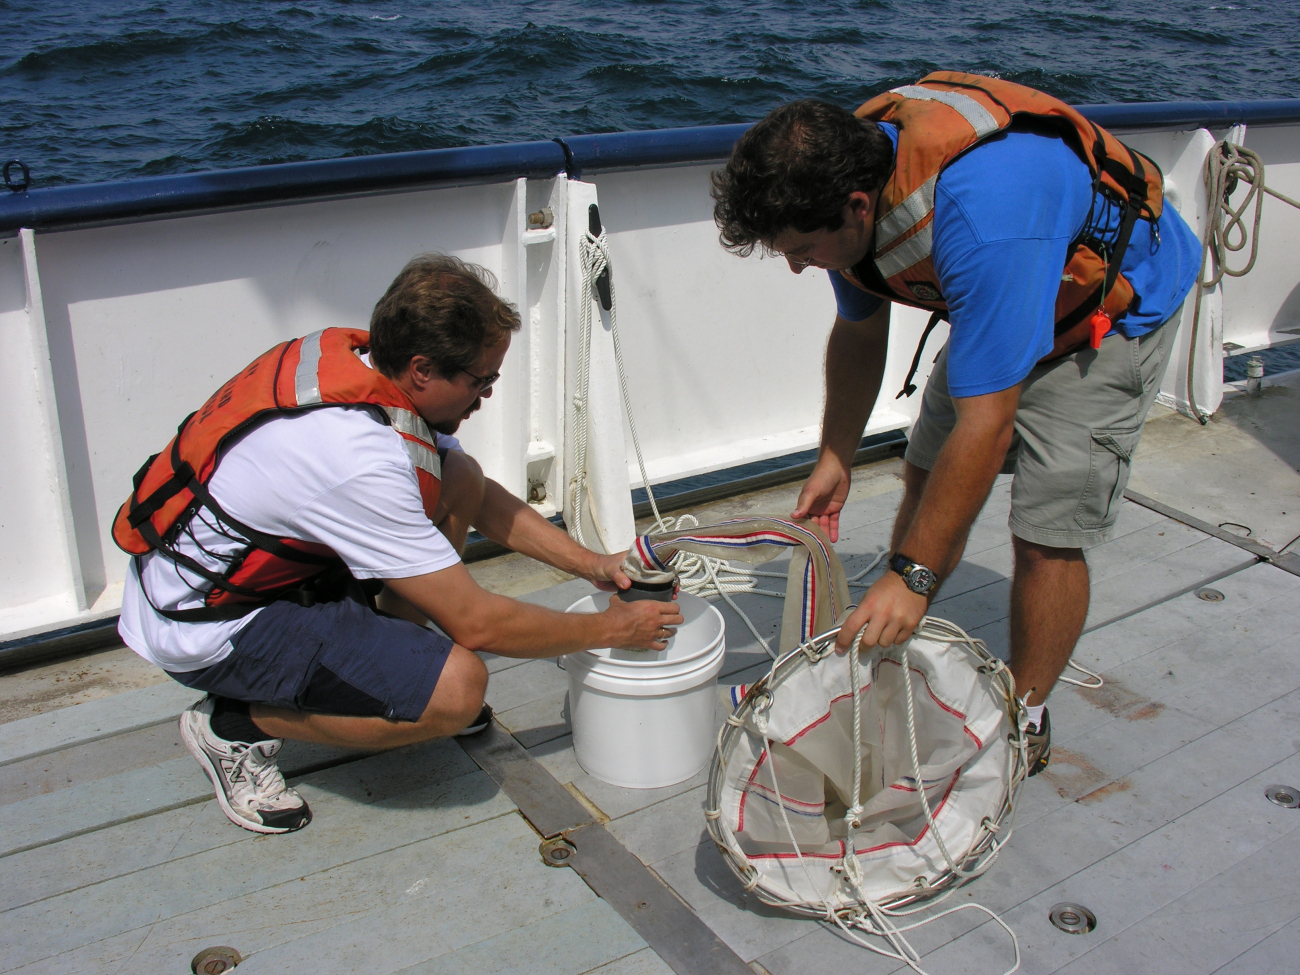 Mikhail Matz and Jon Cohen release the collection bottle from the baseof the plankton net after the tow